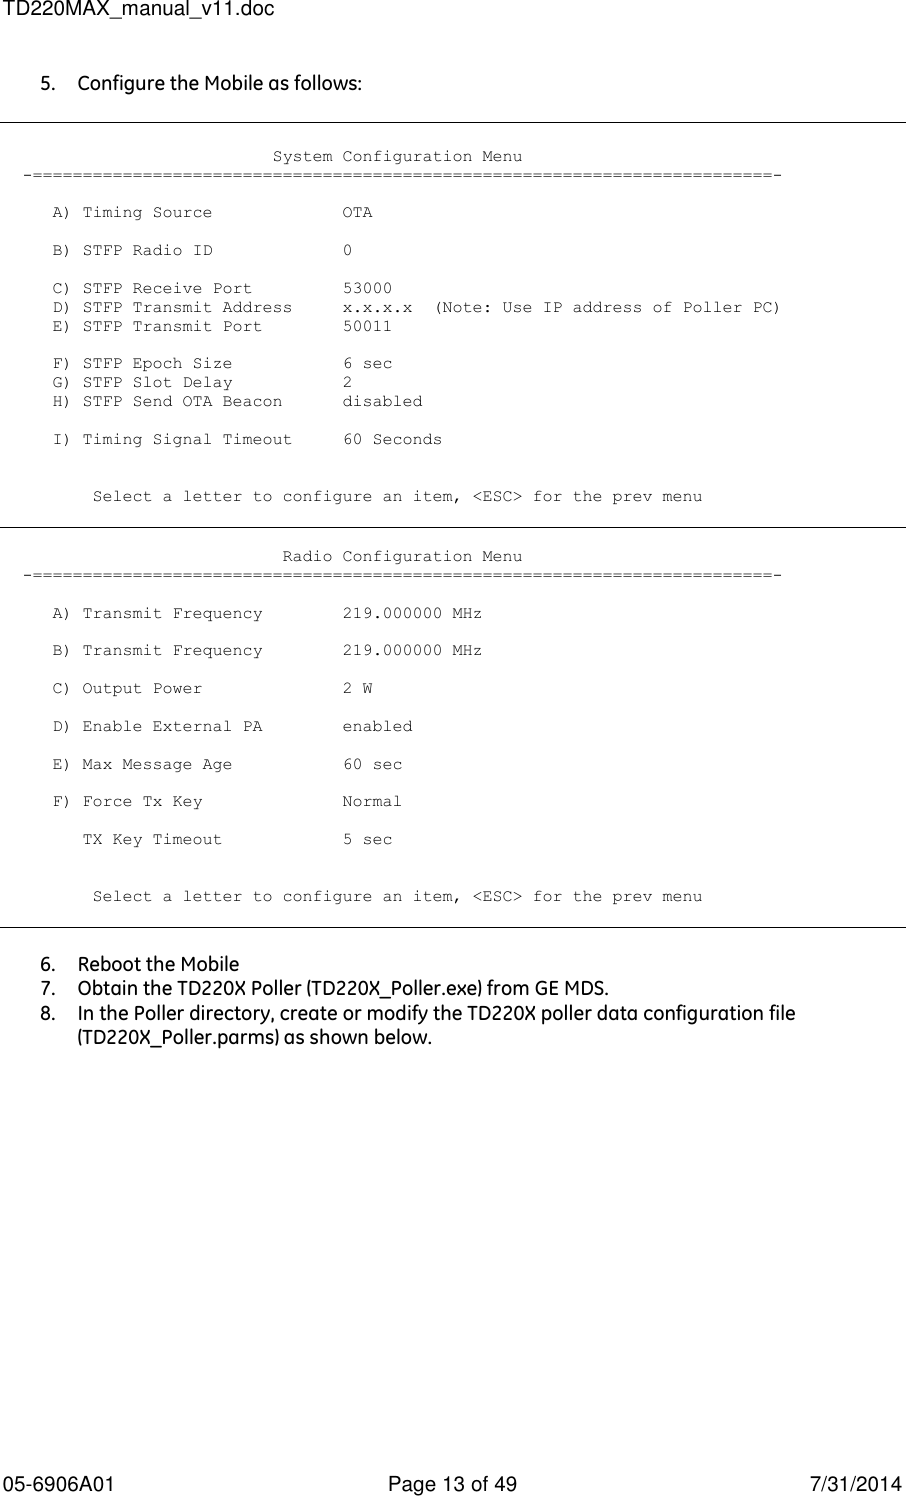 TD220MAX_manual_v11.doc 05-6906A01  Page 13 of 49  7/31/2014 5. Configure the Mobile as follows:                              System Configuration Menu   -==========================================================================-       A) Timing Source             OTA       B) STFP Radio ID             0       C) STFP Receive Port         53000      D) STFP Transmit Address     x.x.x.x  (Note: Use IP address of Poller PC)      E) STFP Transmit Port        50011       F) STFP Epoch Size           6 sec      G) STFP Slot Delay           2      H) STFP Send OTA Beacon      disabled       I) Timing Signal Timeout     60 Seconds            Select a letter to configure an item, &lt;ESC&gt; for the prev menu                               Radio Configuration Menu   -==========================================================================-       A) Transmit Frequency        219.000000 MHz       B) Transmit Frequency        219.000000 MHz       C) Output Power              2 W       D) Enable External PA        enabled       E) Max Message Age           60 sec       F) Force Tx Key              Normal          TX Key Timeout            5 sec            Select a letter to configure an item, &lt;ESC&gt; for the prev menu   6. Reboot the Mobile 7. Obtain the TD220X Poller (TD220X_Poller.exe) from GE MDS. 8. In the Poller directory, create or modify the TD220X poller data configuration file (TD220X_Poller.parms) as shown below. 